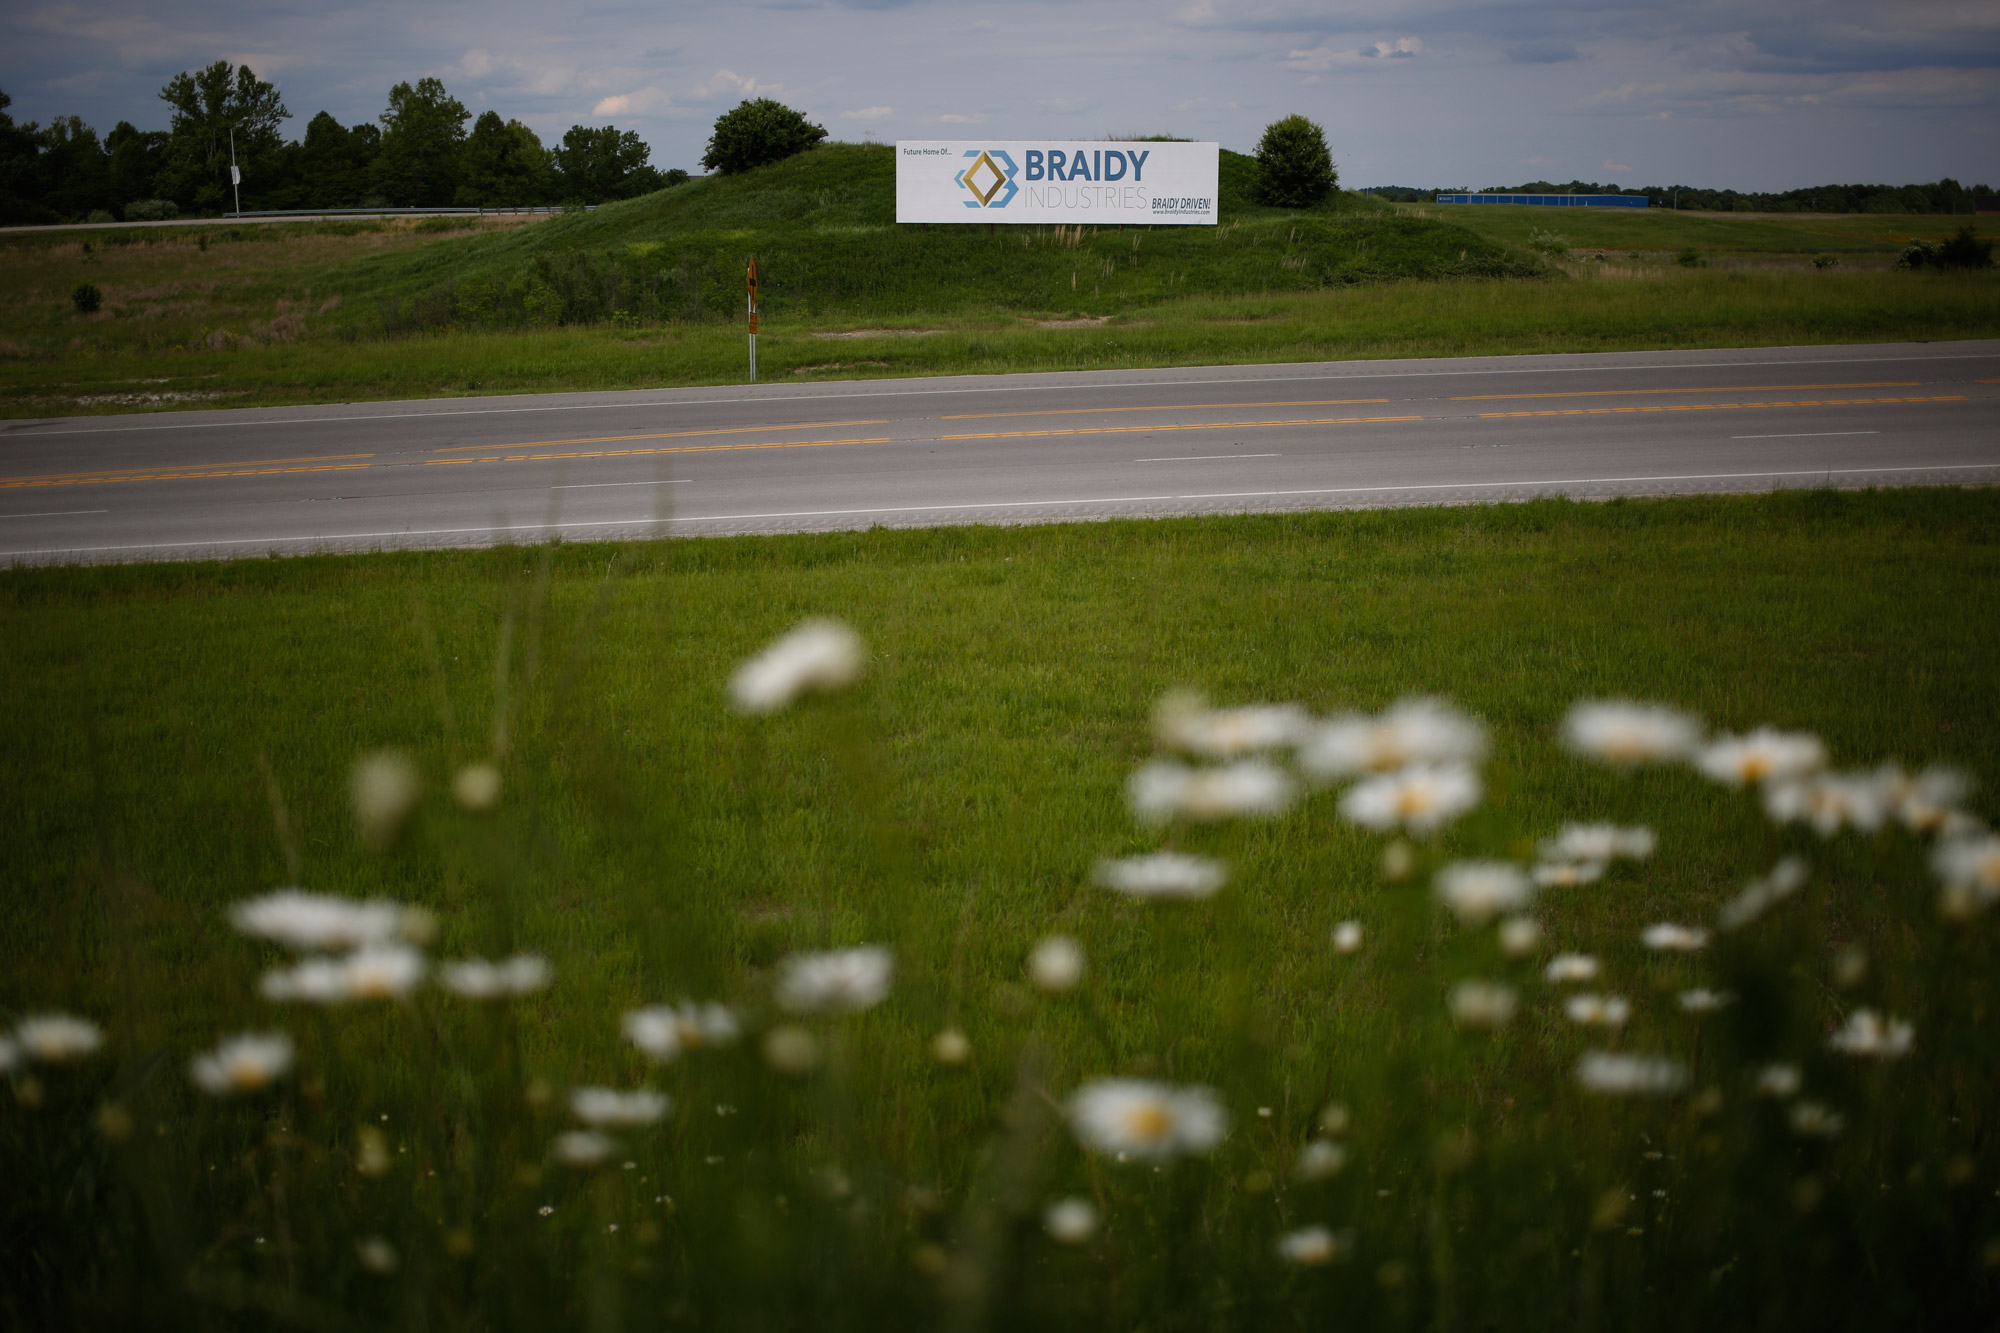 A Braidy sign looms over the future location of the company’s aluminum mill in northeastern Kentucky